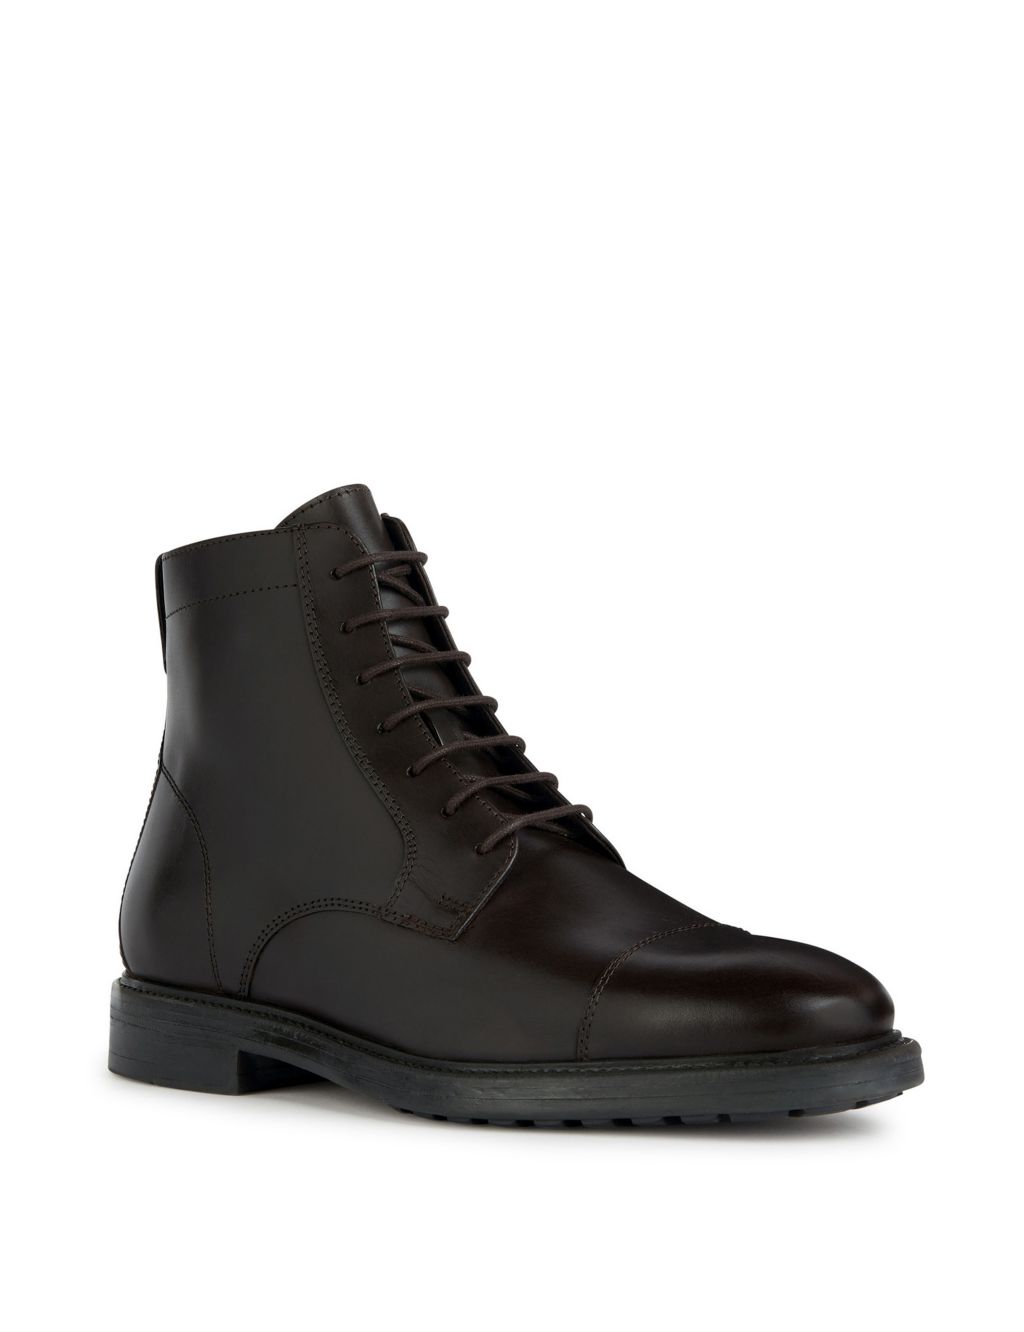 Wide Fit Leather Side Zip Casual Boots | Geox | M&S